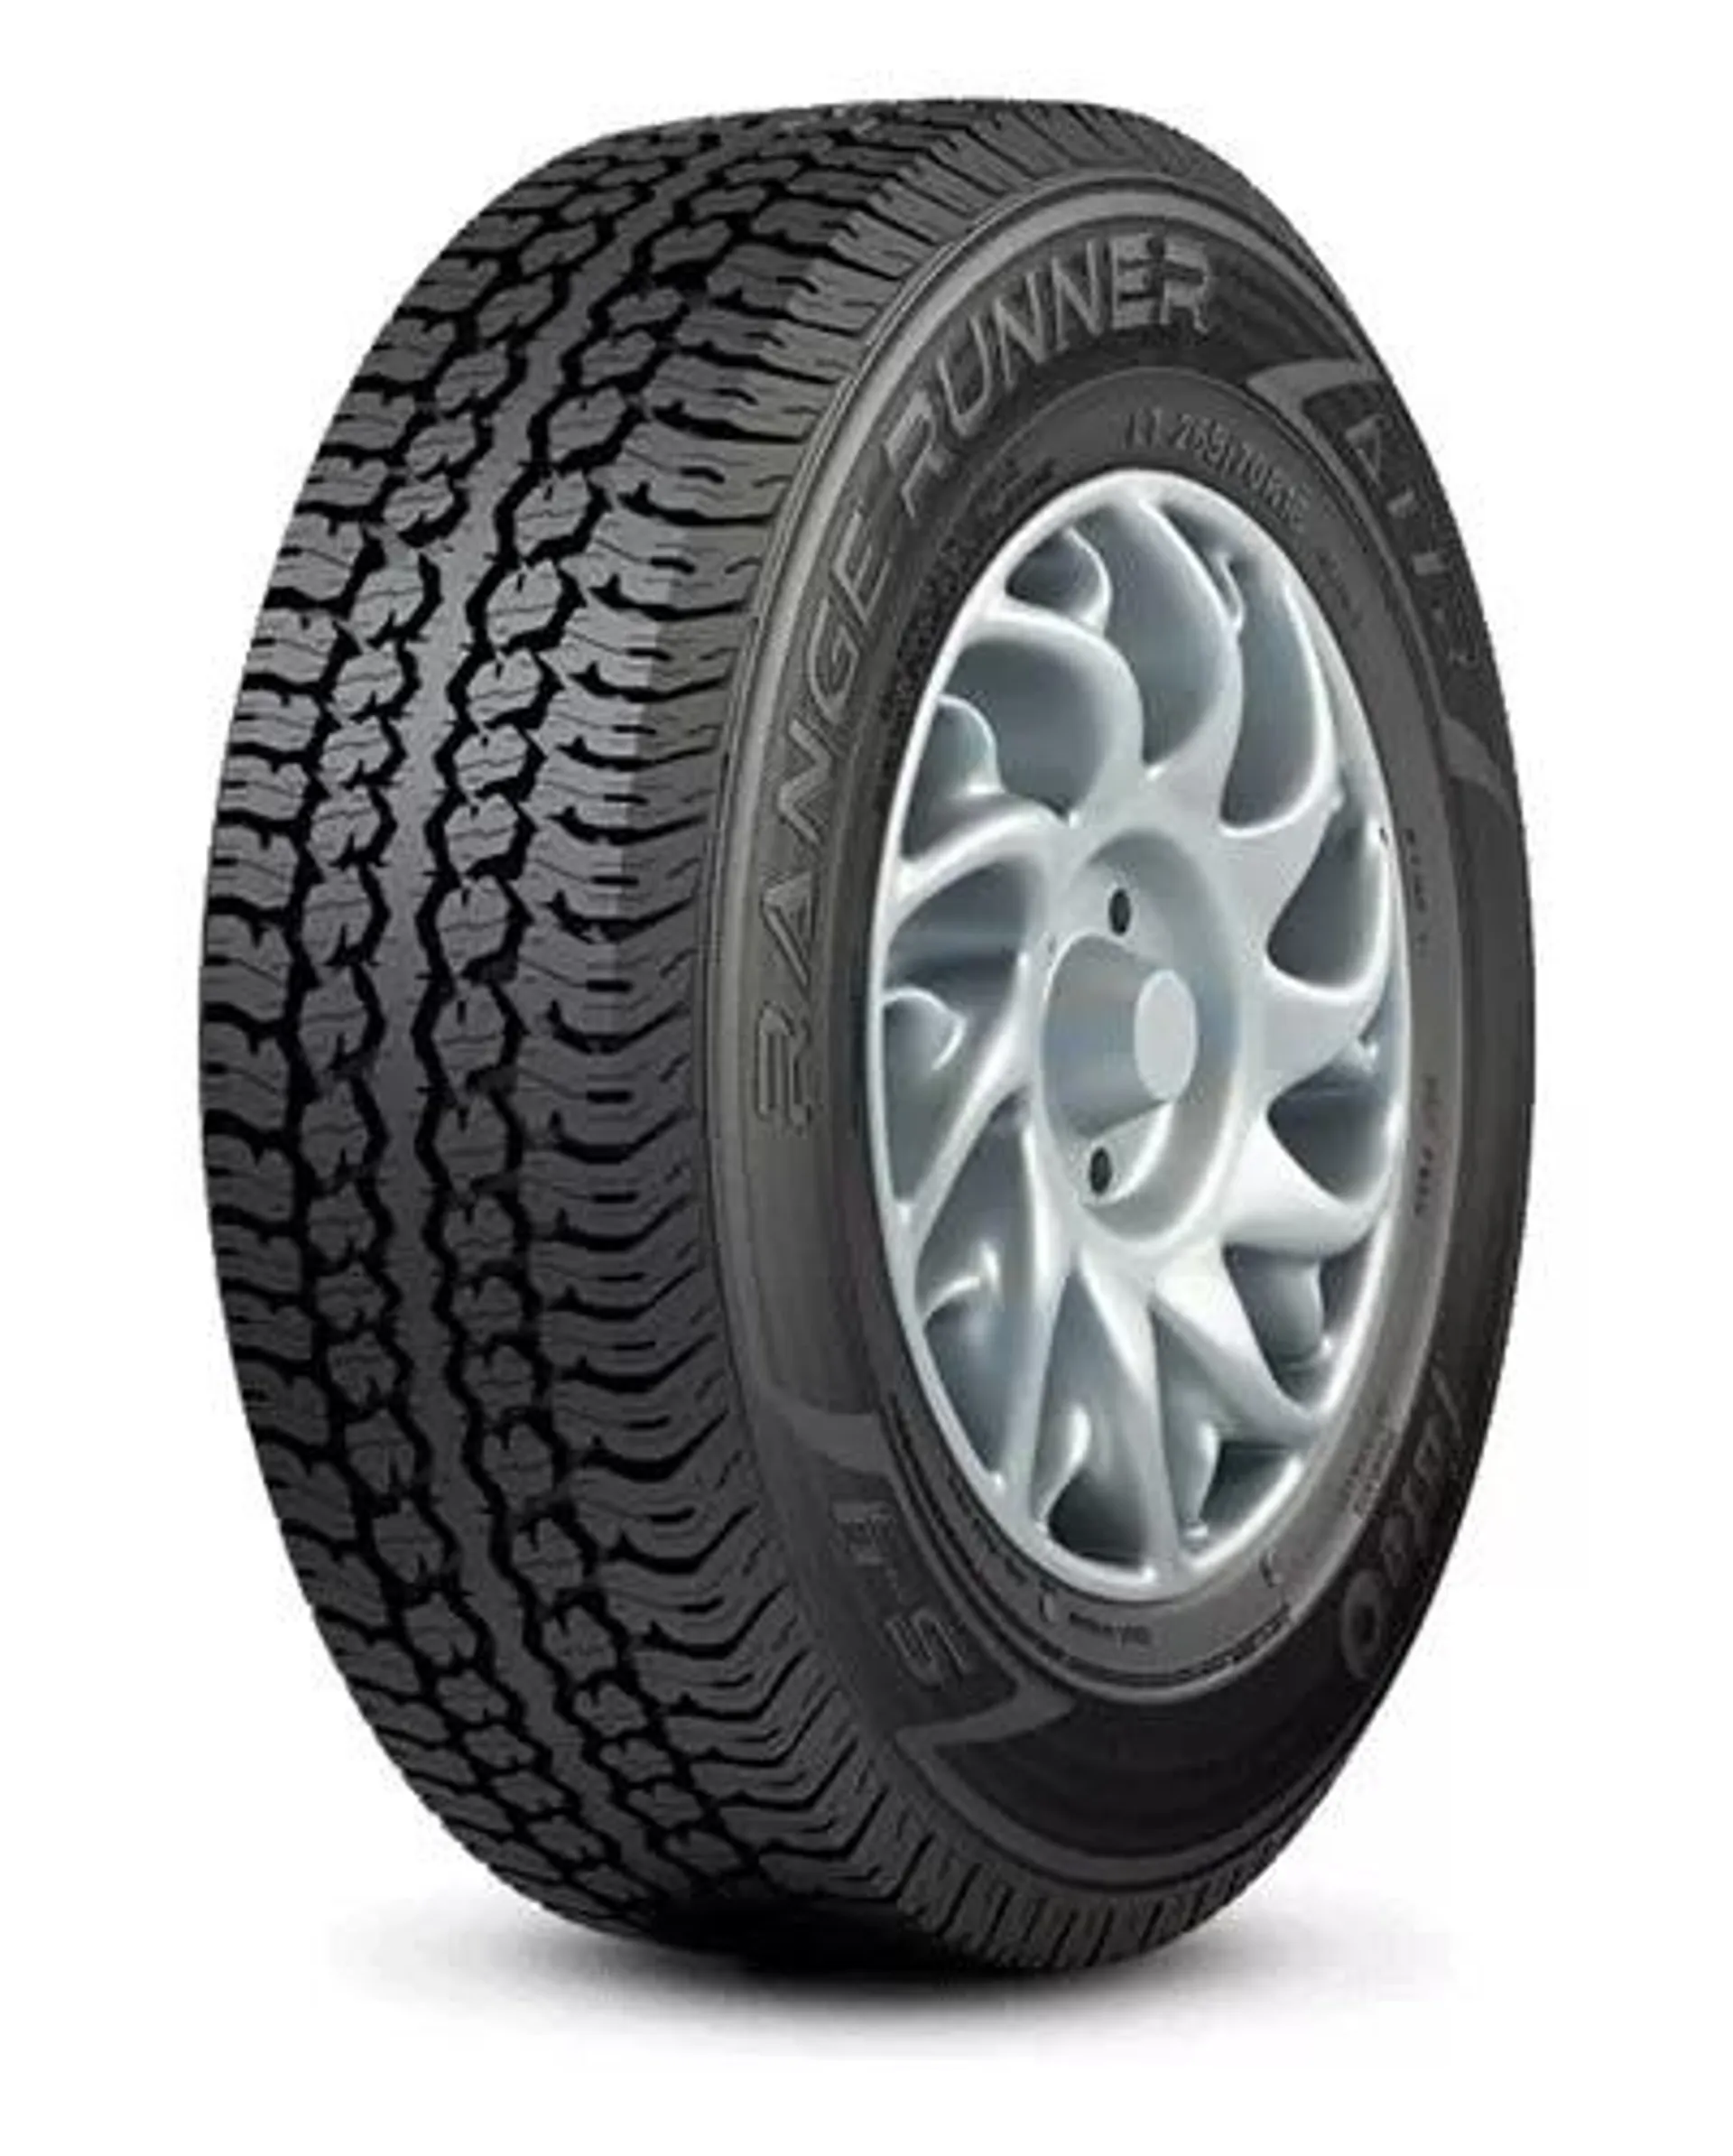 225/70R17 108/106S RR AT/R SERIE 4 FATE